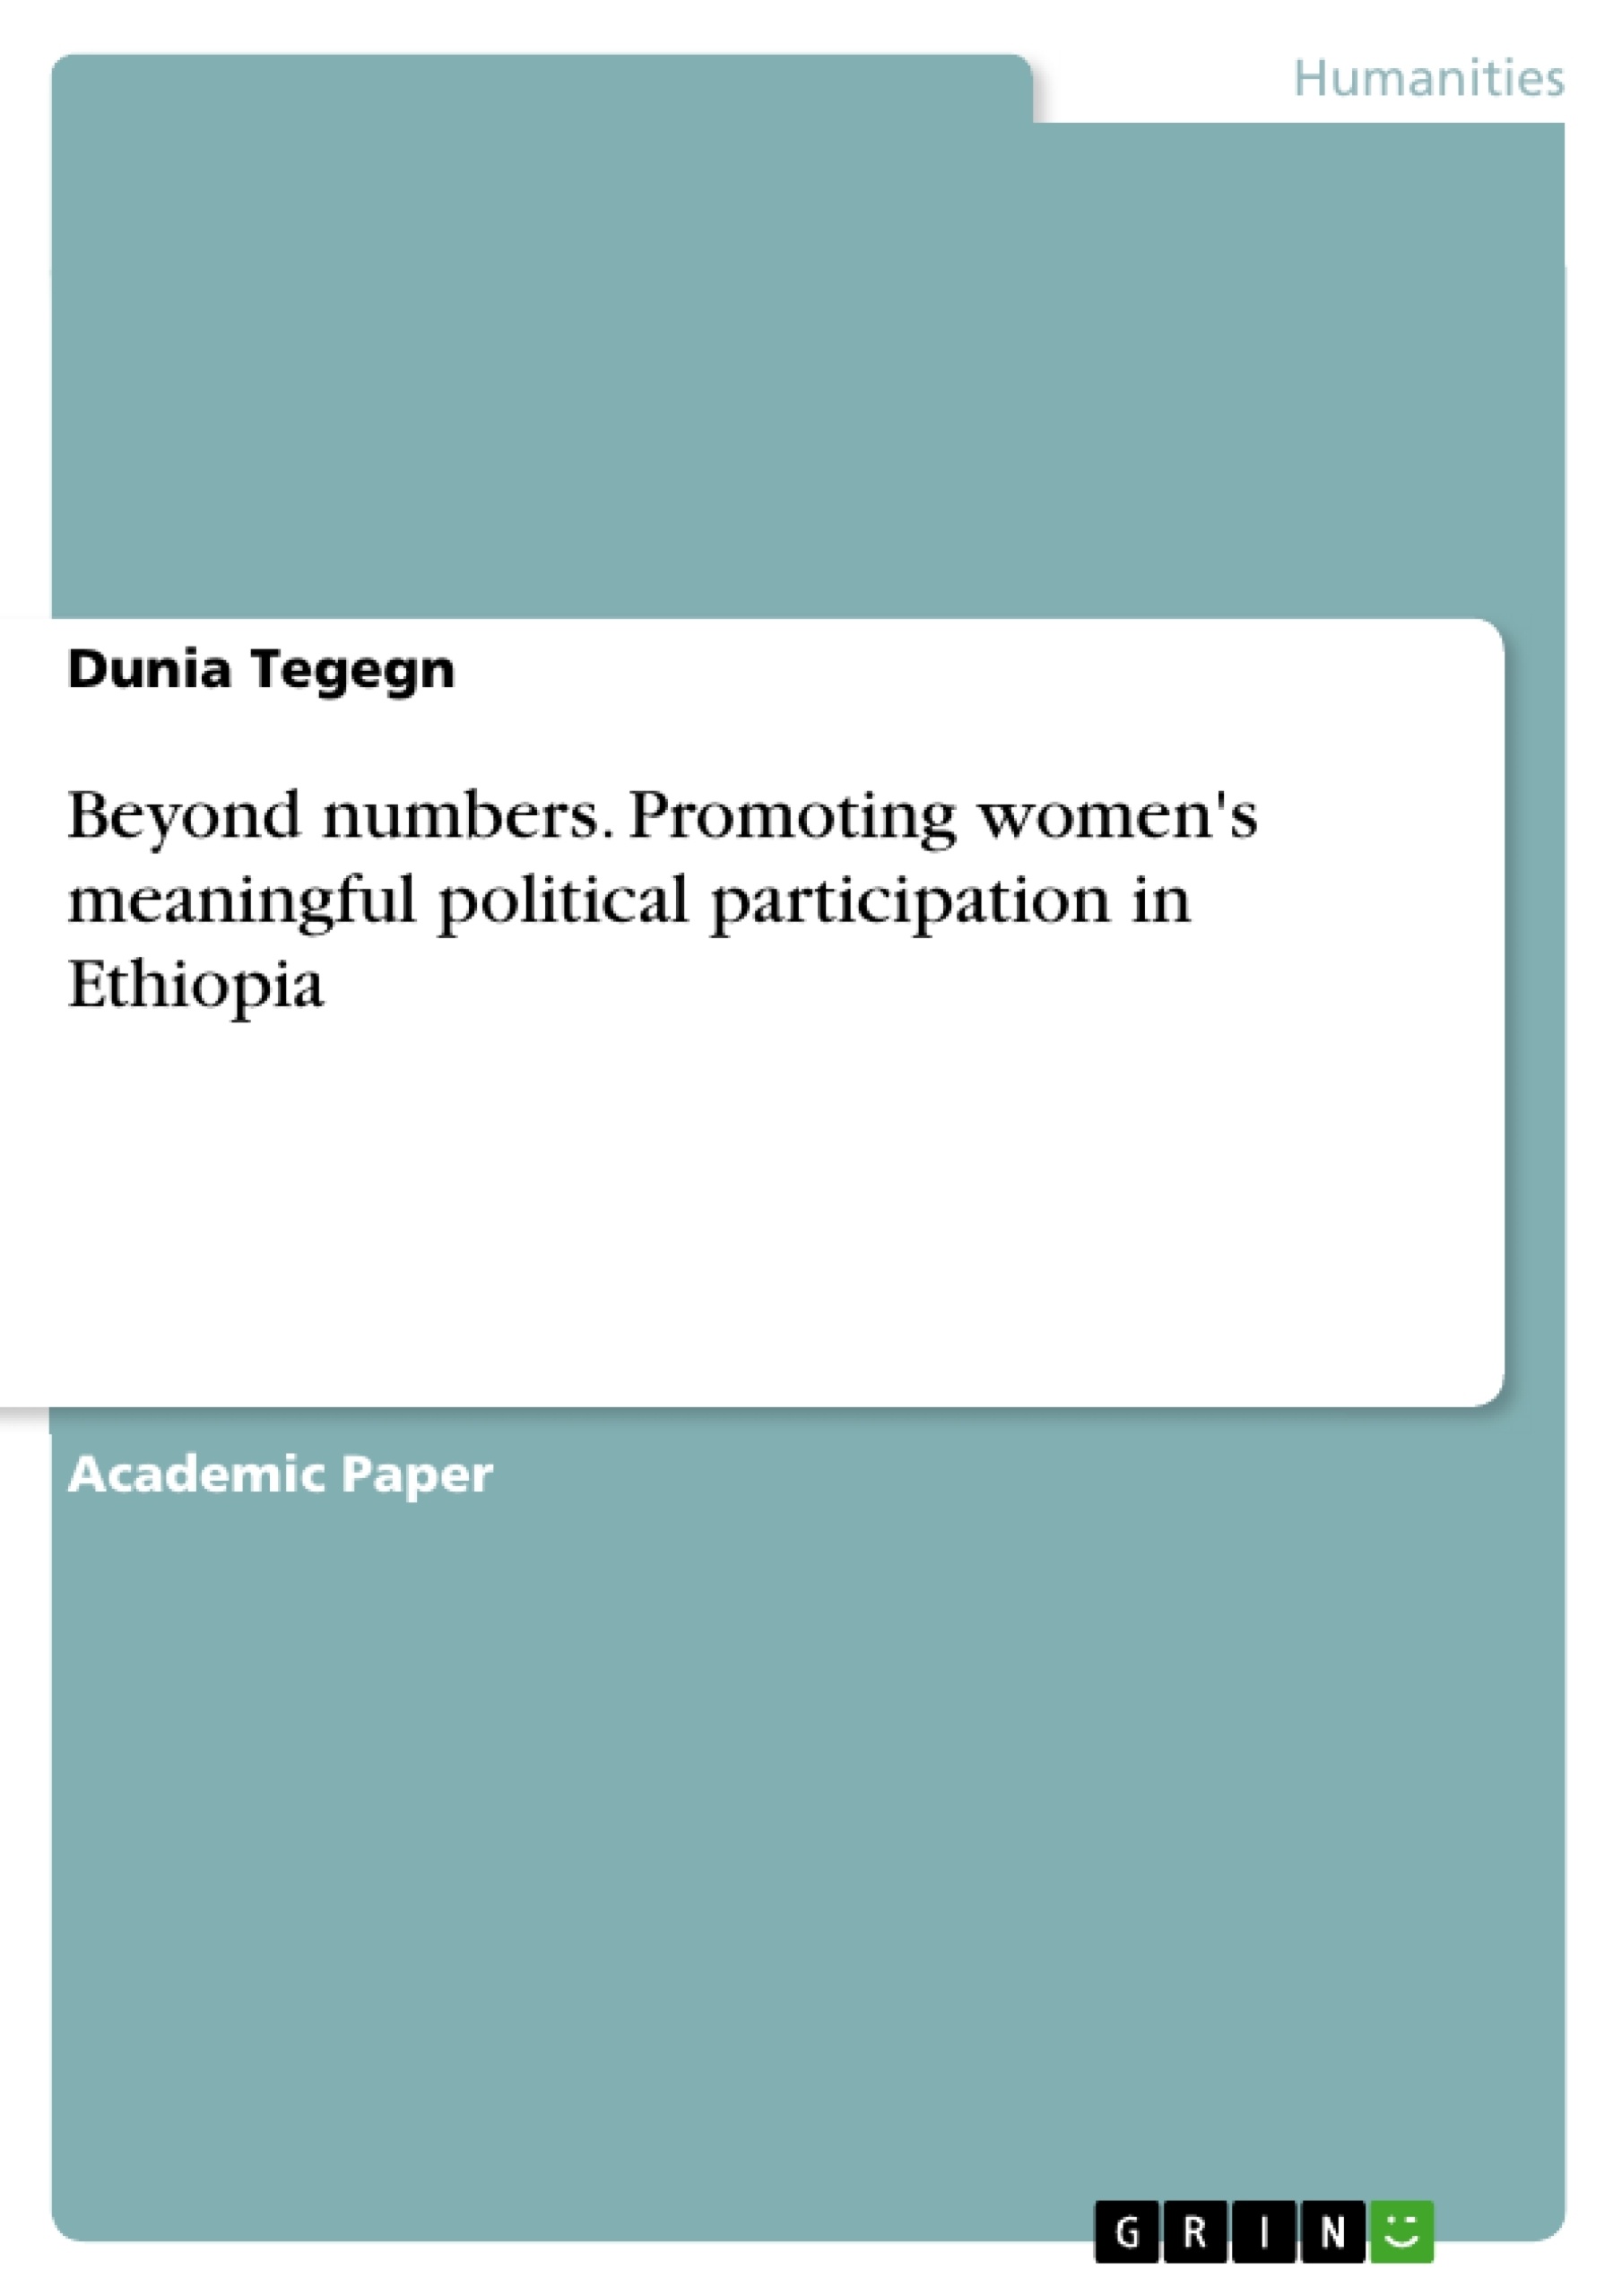 Título: Beyond numbers. Promoting women's meaningful political participation in Ethiopia